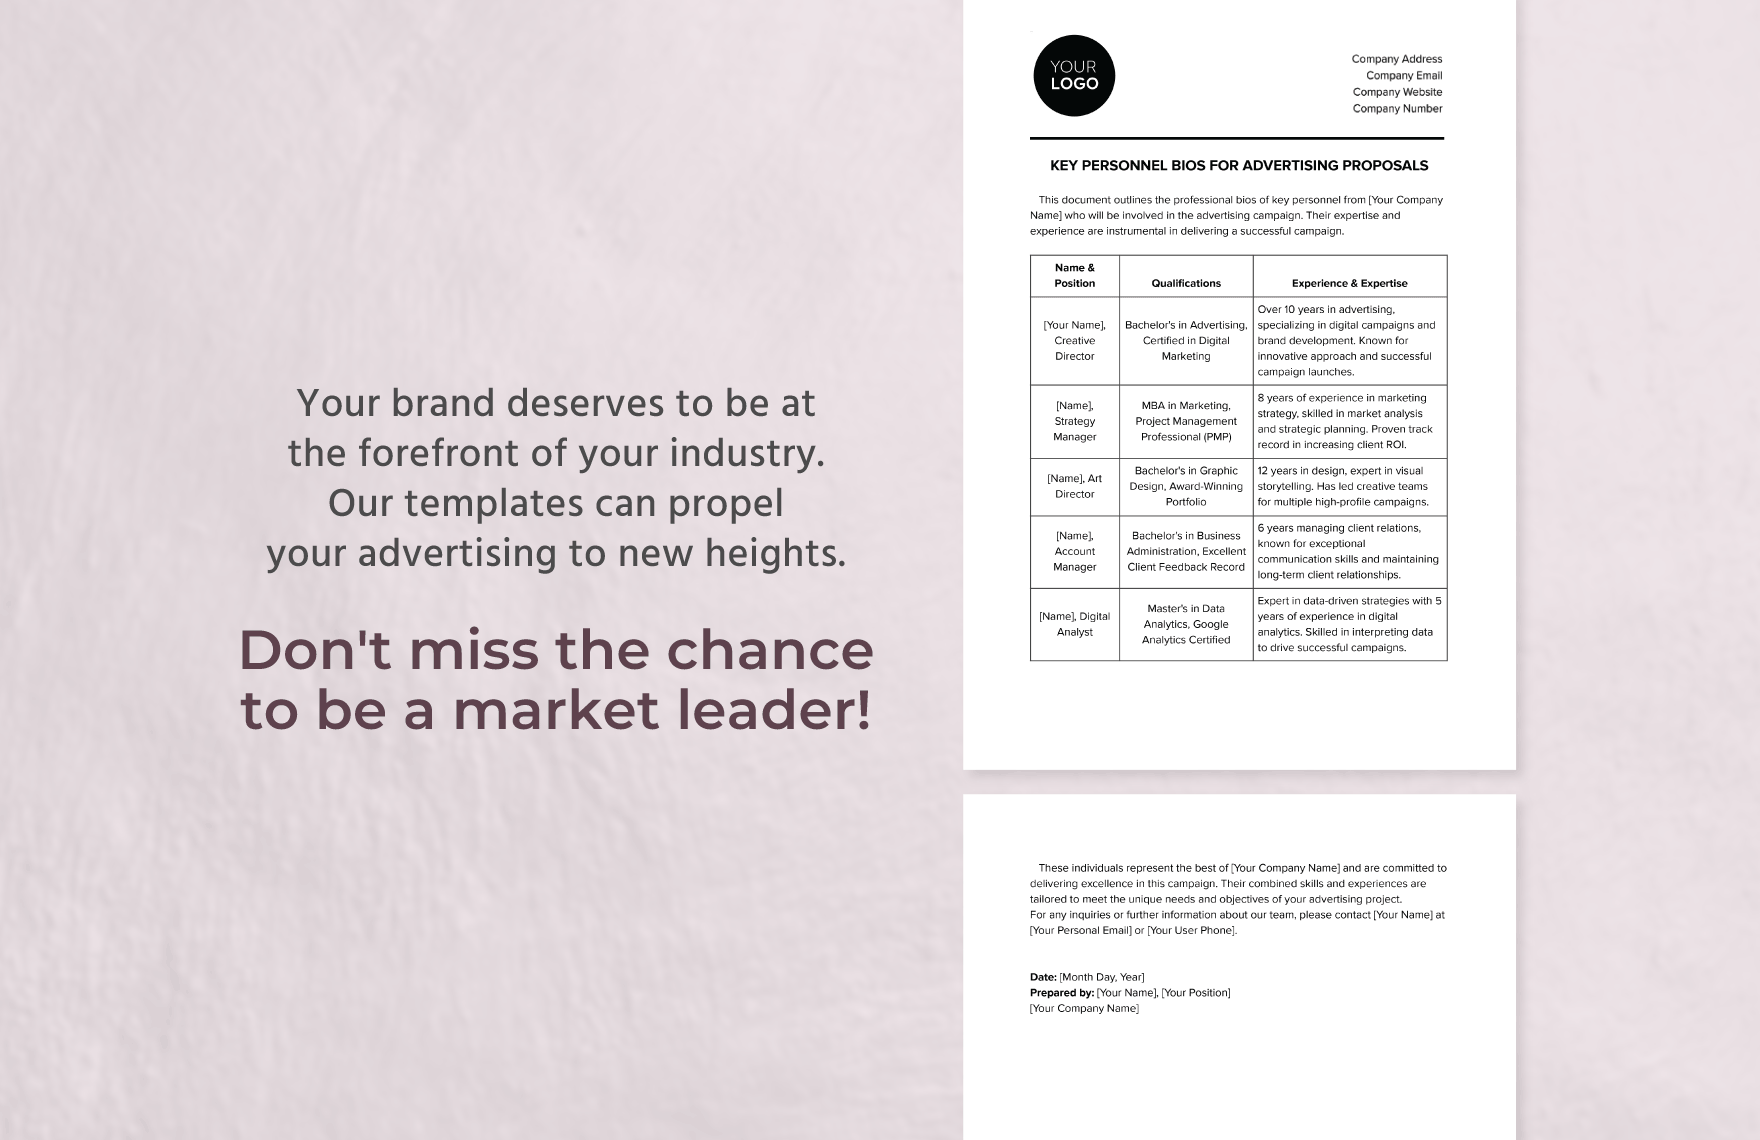 Key Personnel Bios for Advertising Proposals Template